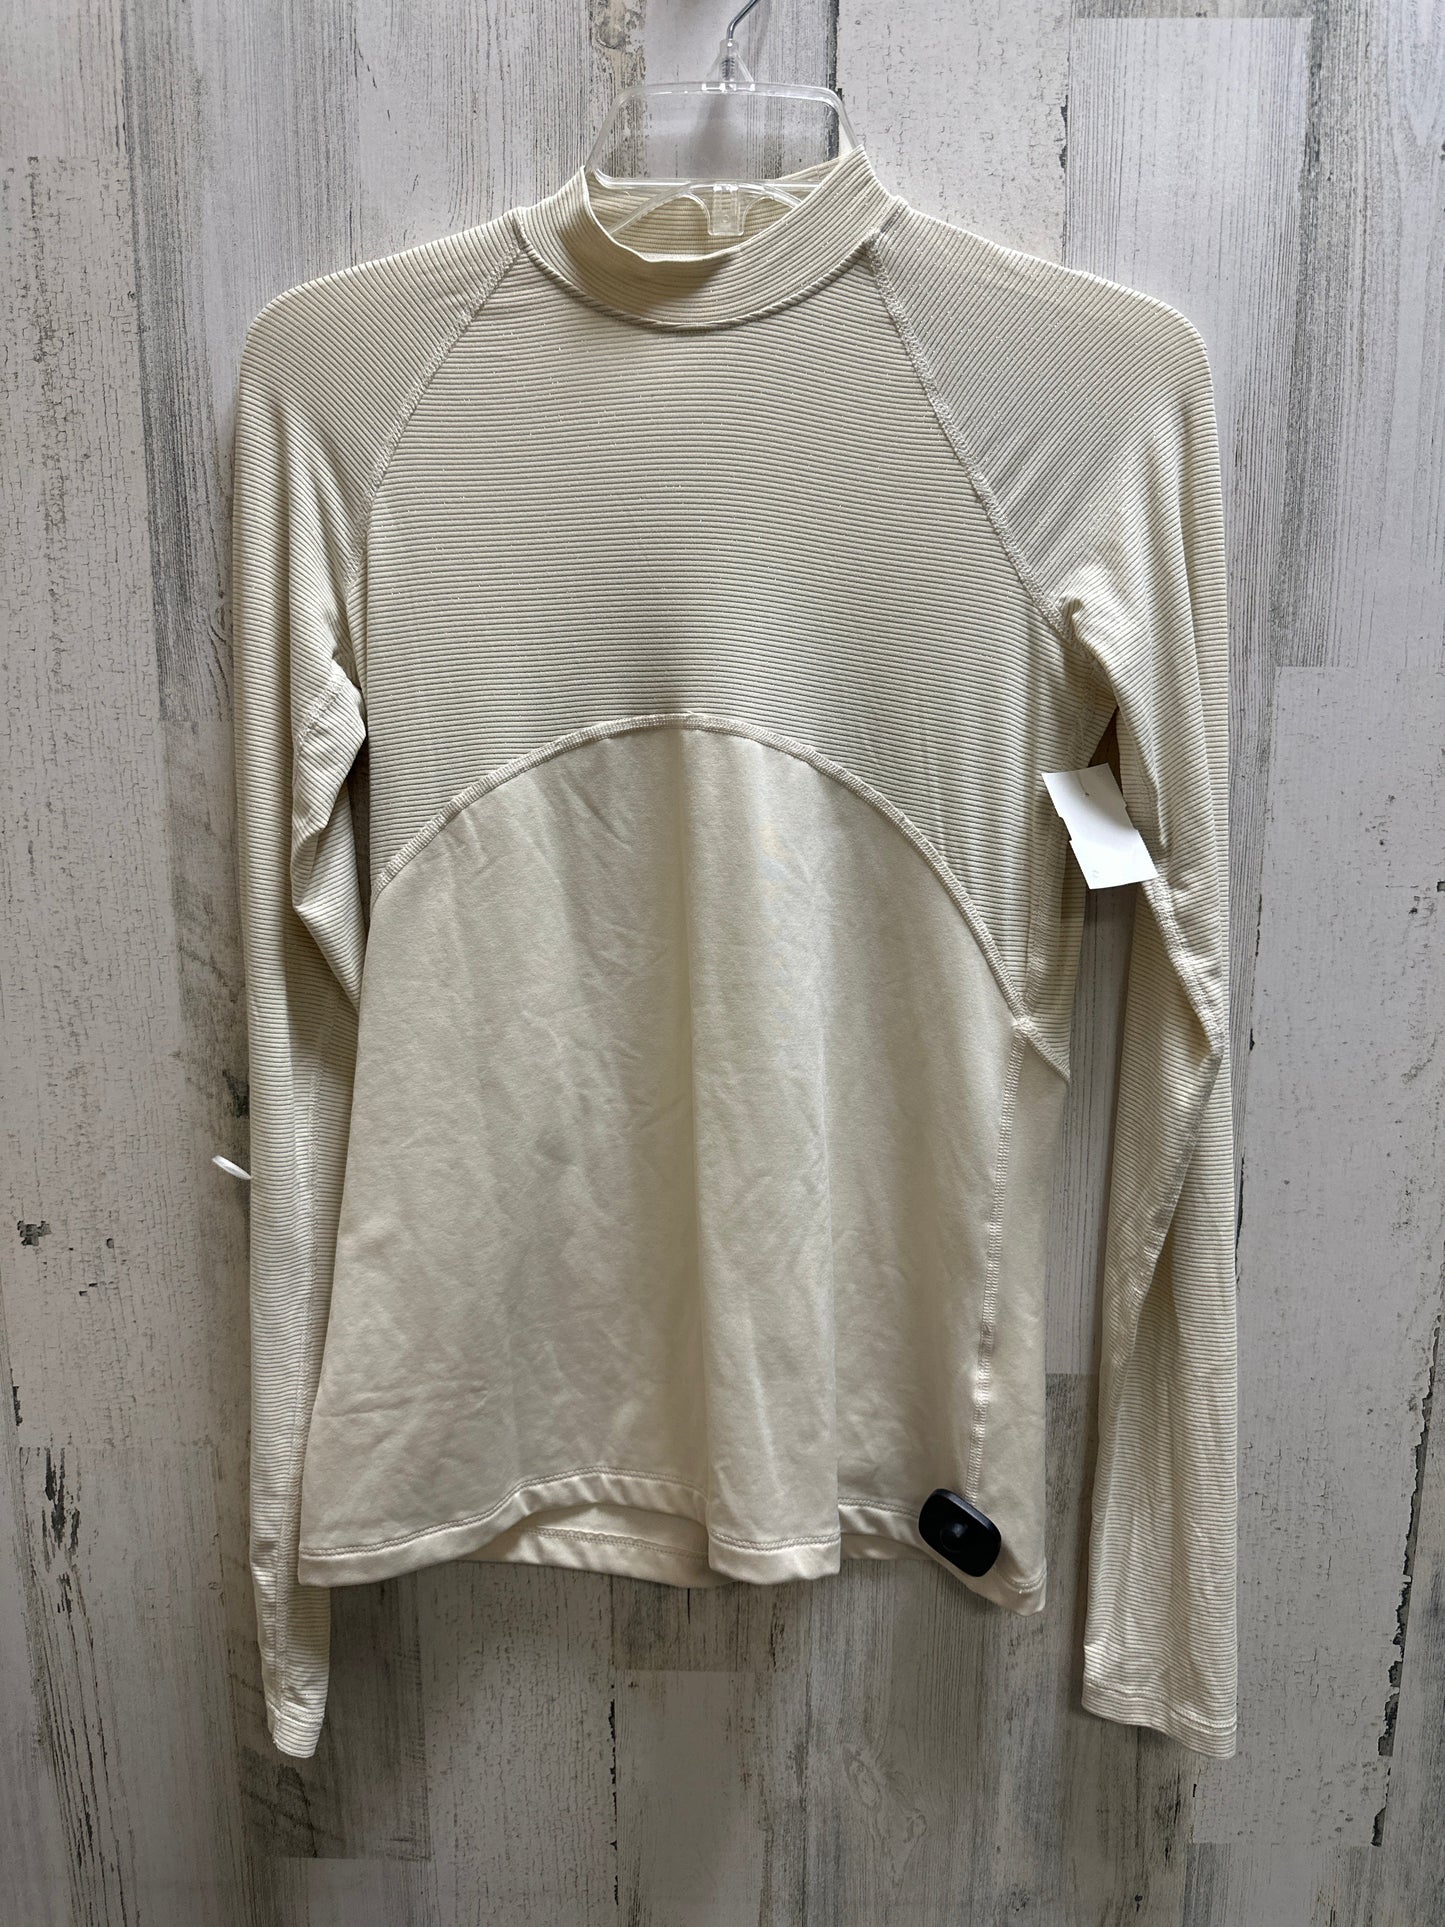 White Athletic Top Long Sleeve Crewneck Nike Apparel, Size S